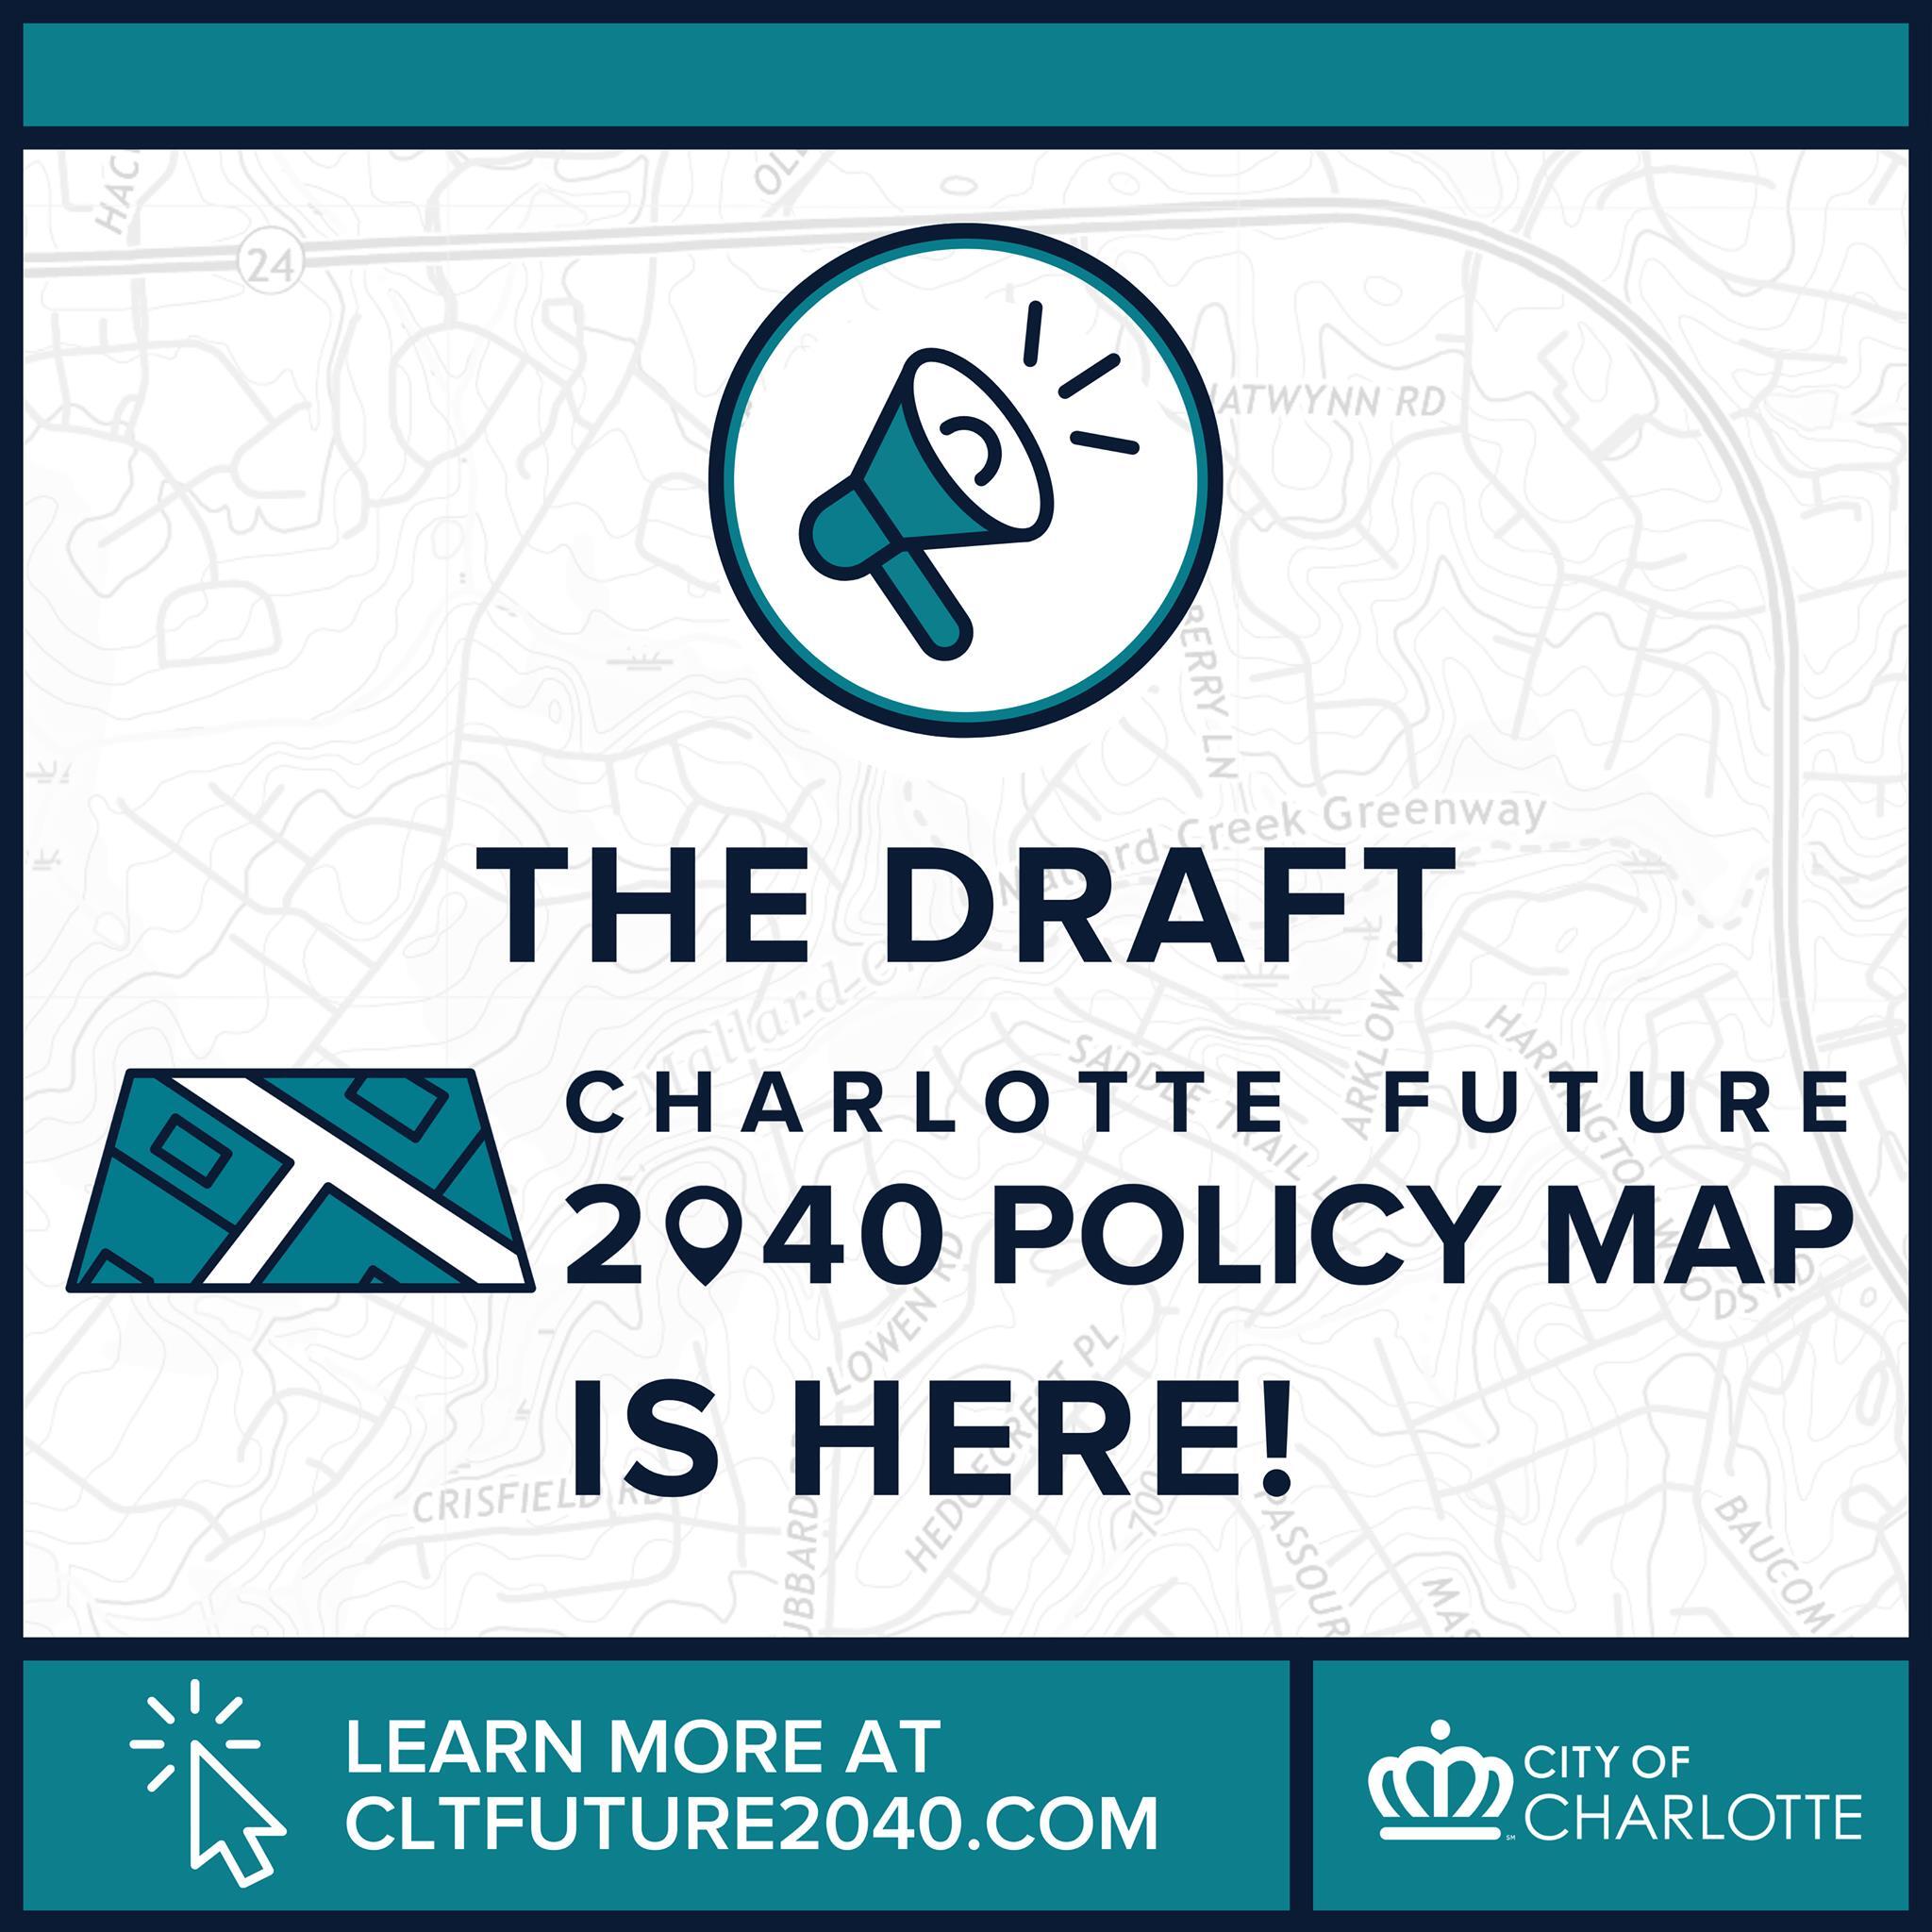 Charlotte Future 2040 Policy Map And Charlotte Streets Map City Of